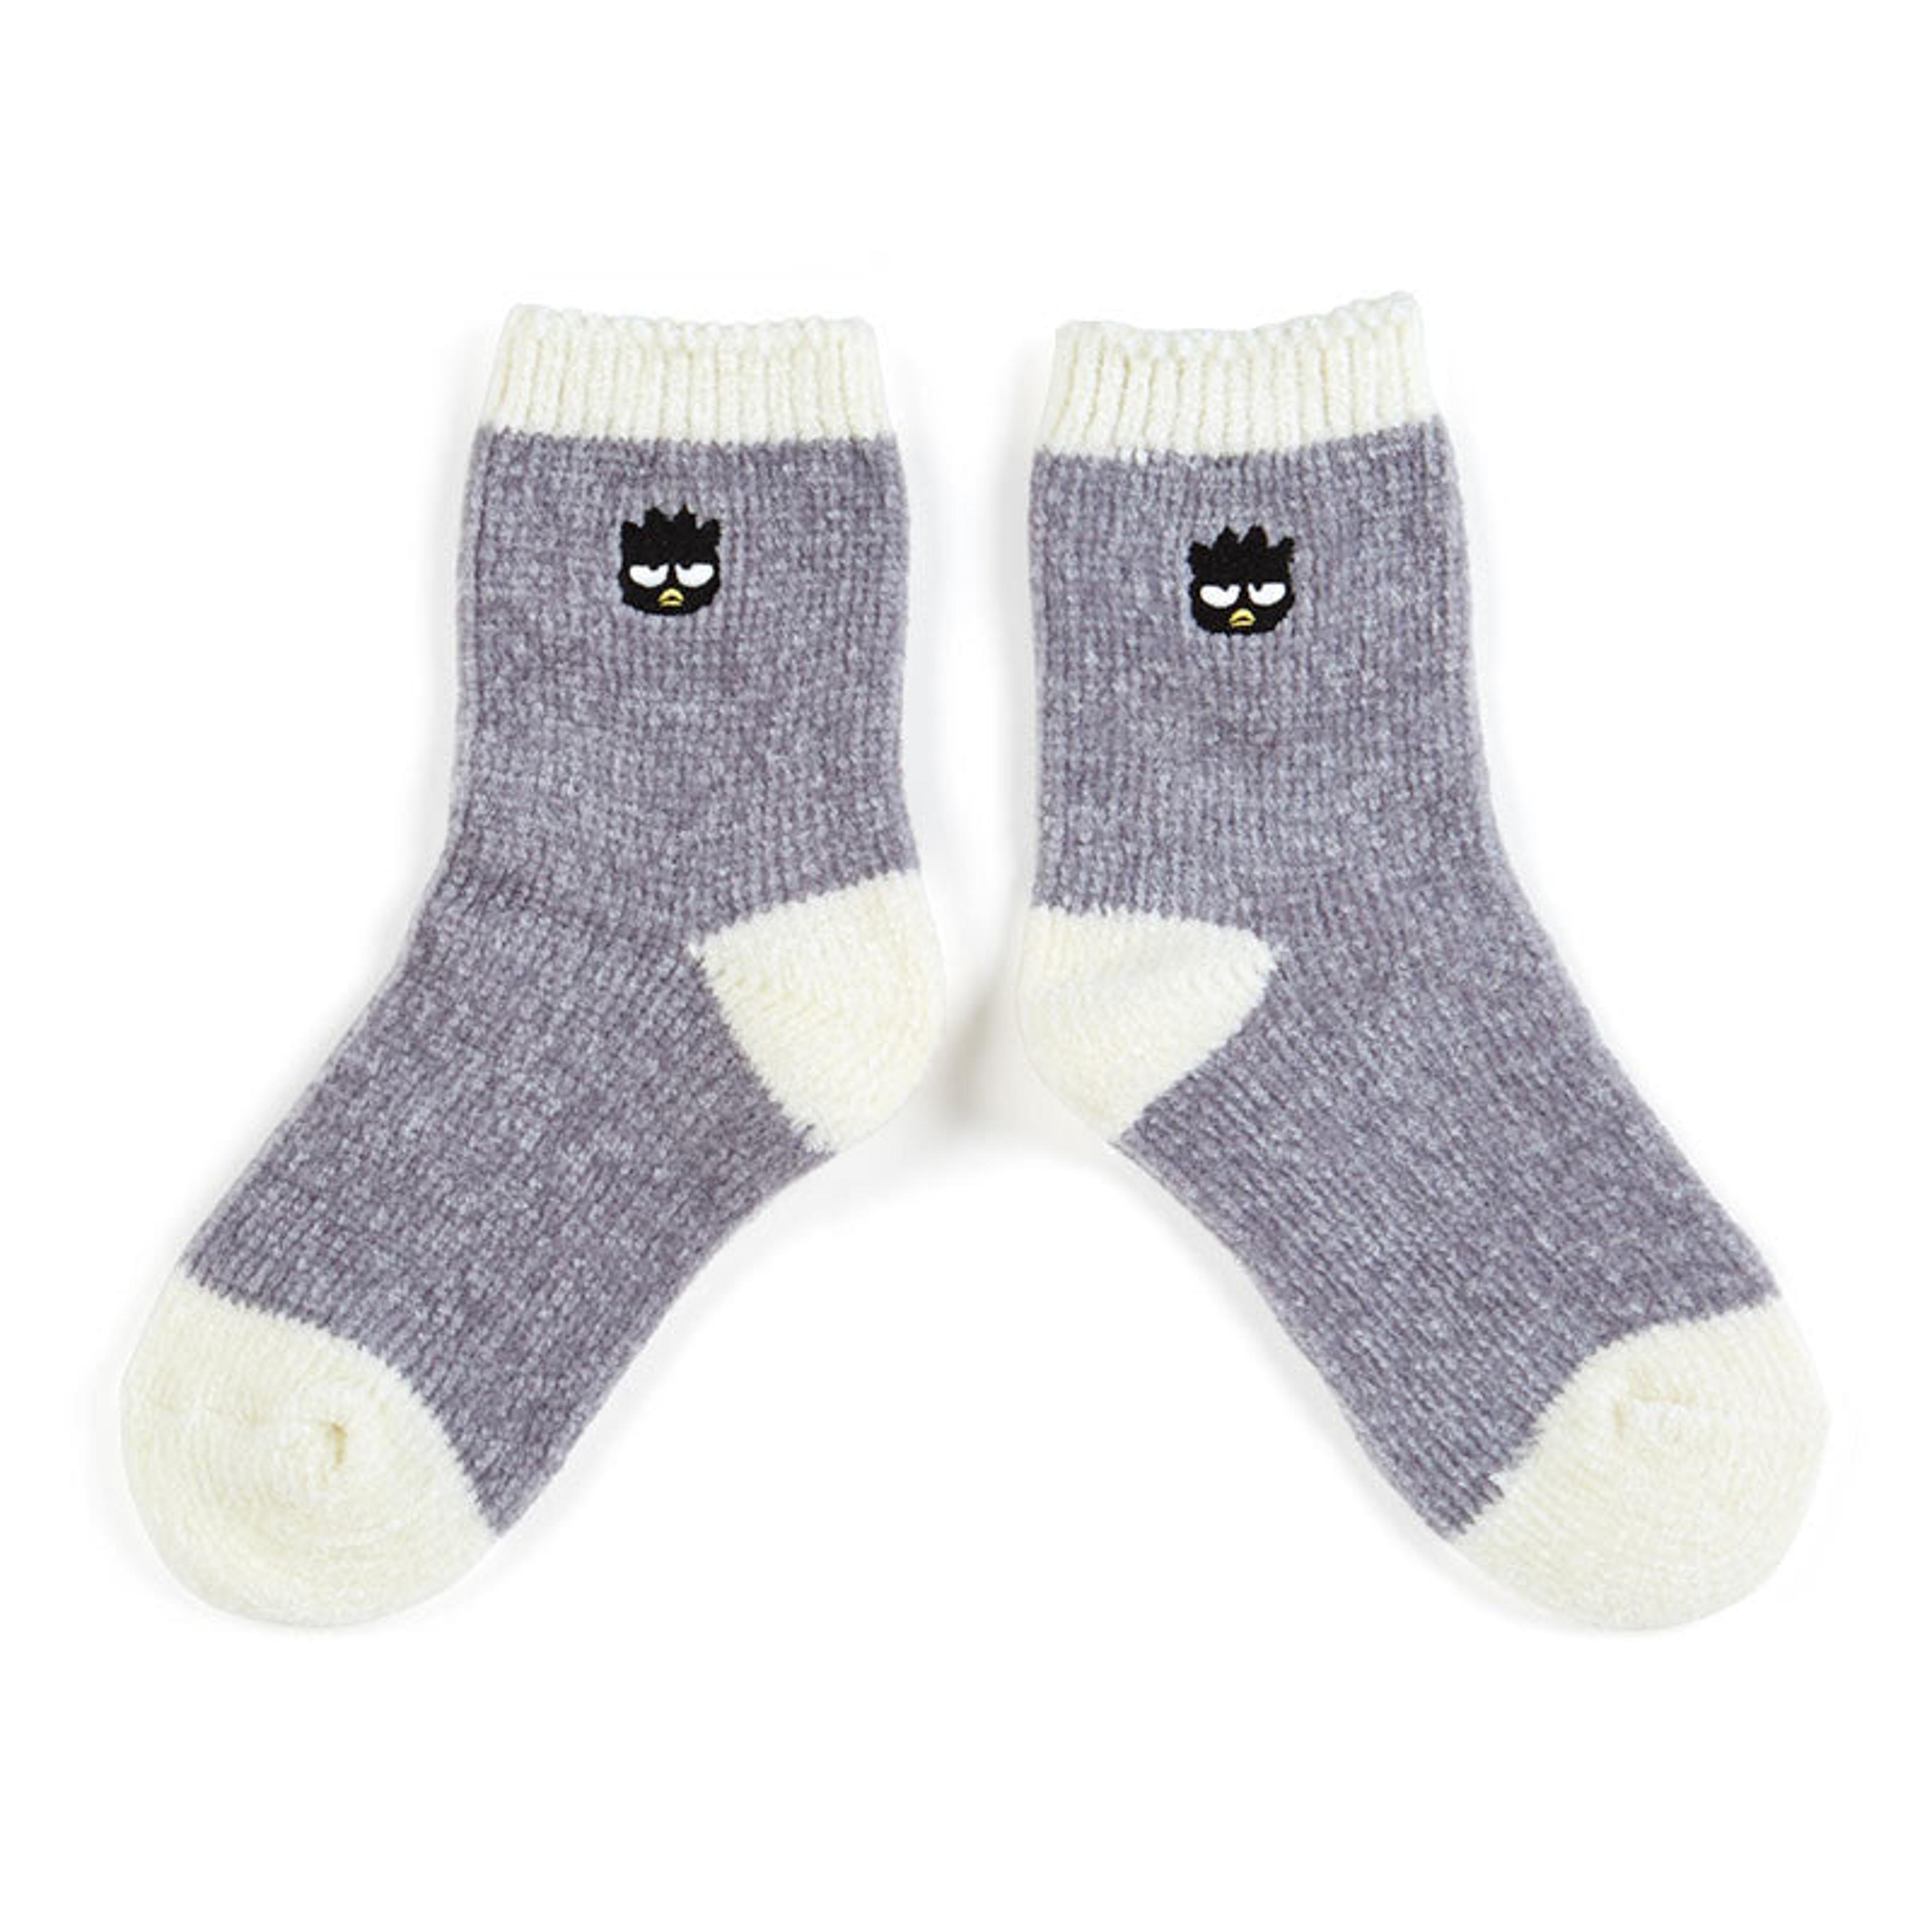 Alternate View 8 of Sanrio Characters Embroidered Chenille Adult Socks